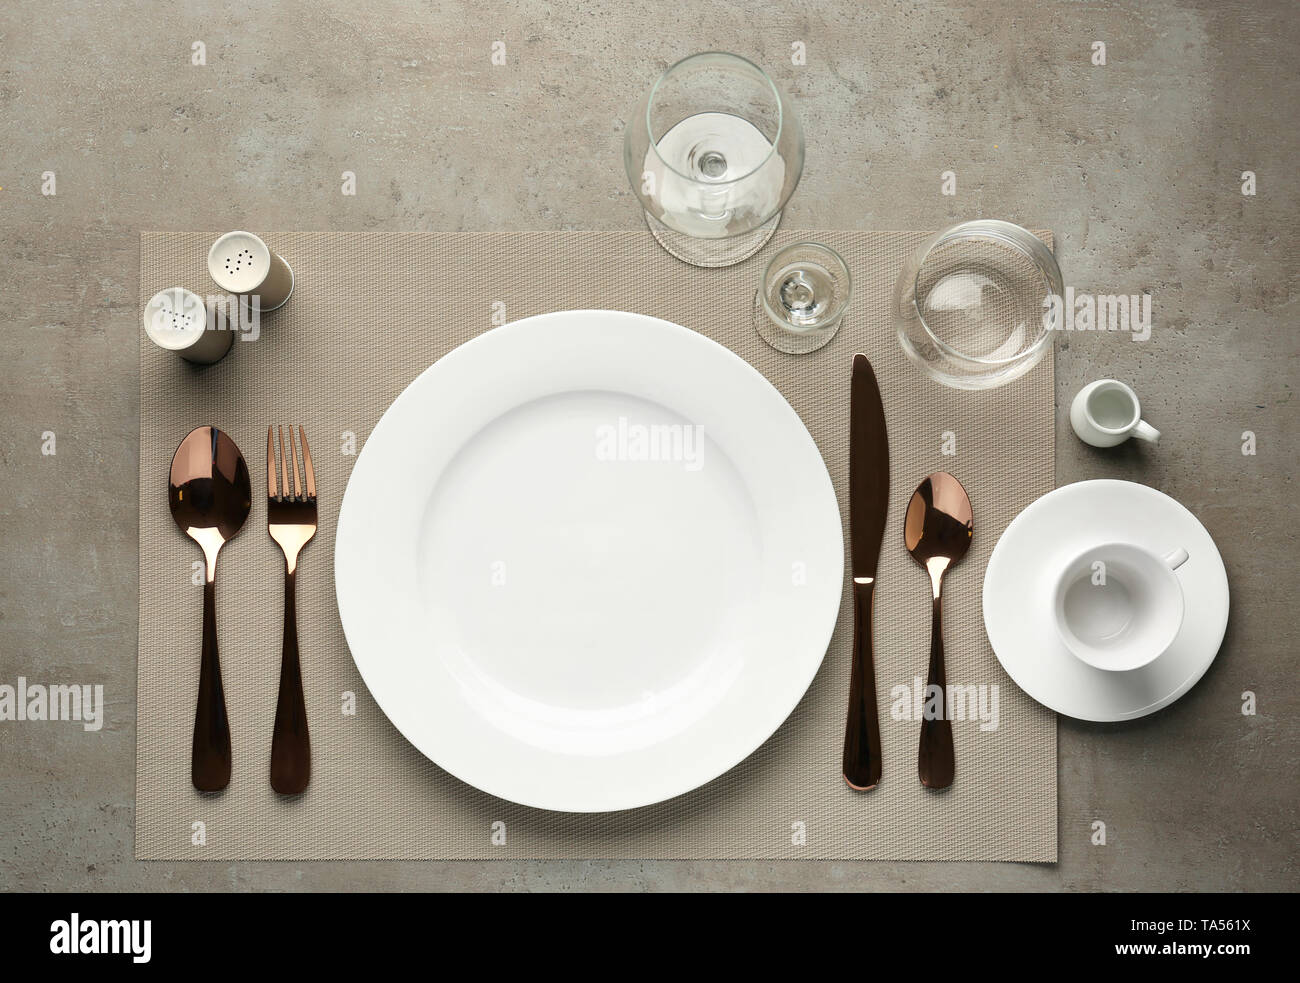 Simple table setting on grey background Stock Photo